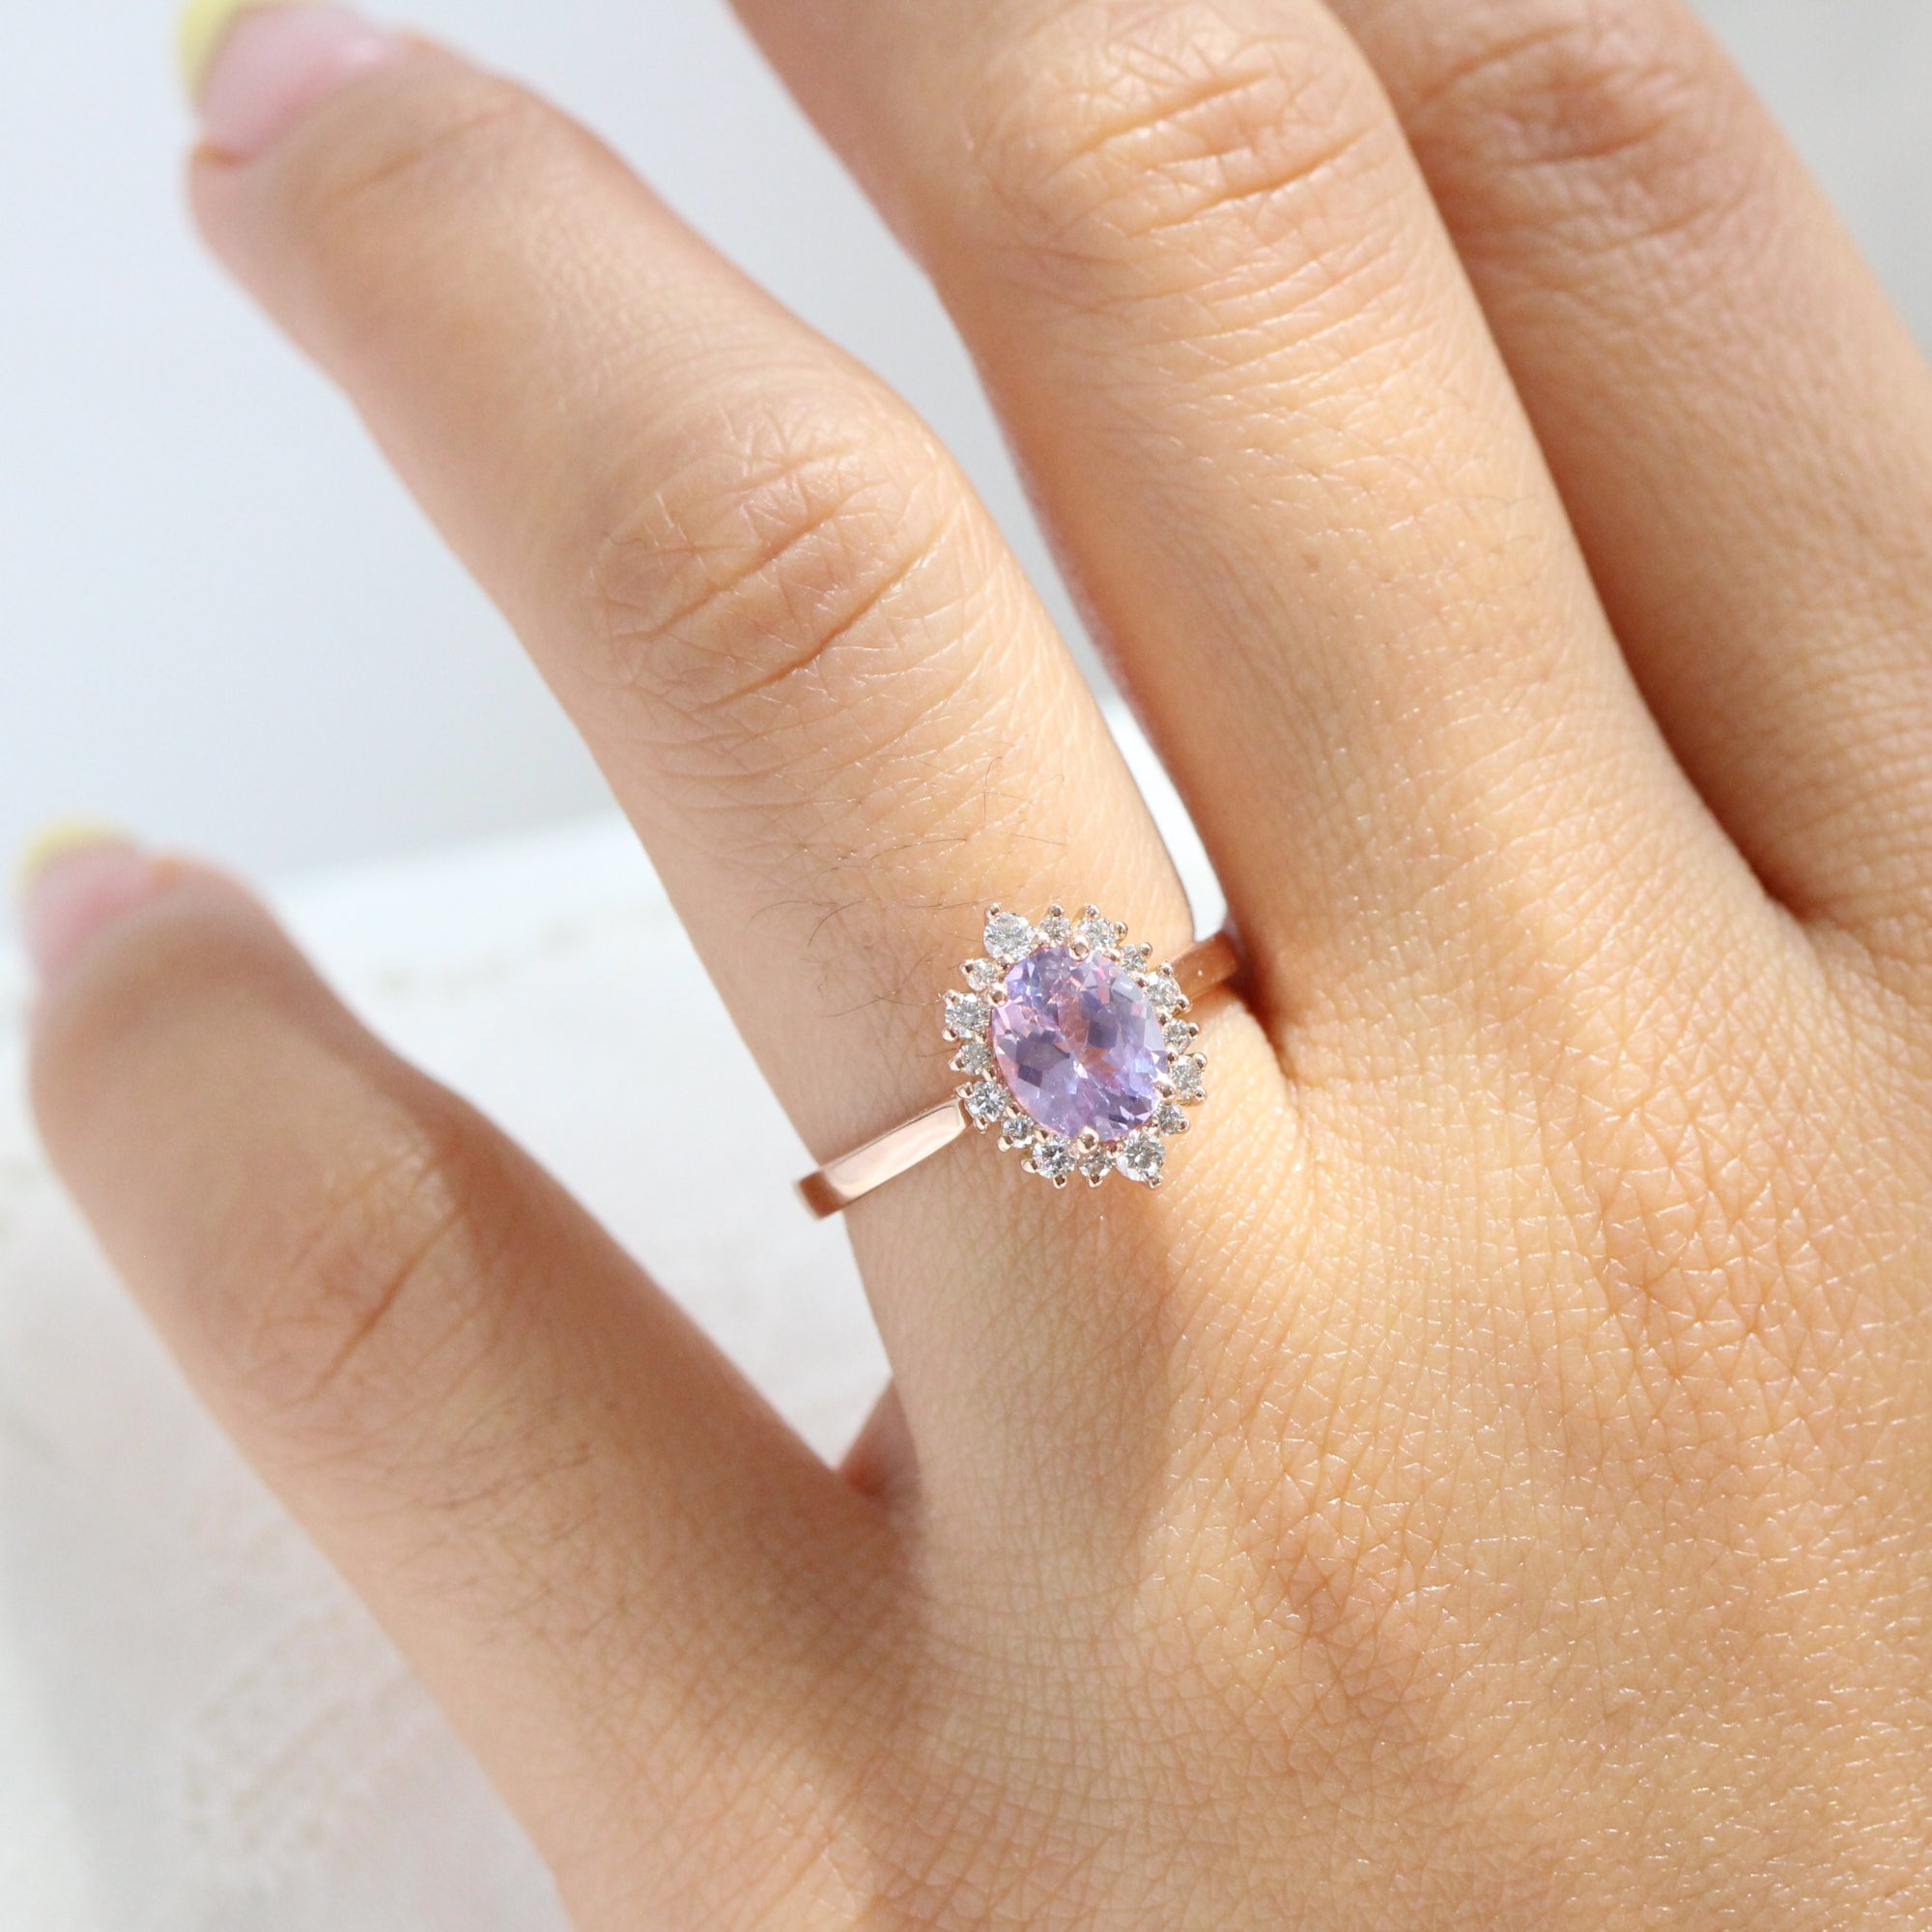 Halo diamond lavender sapphire ring rose gold cluster engagement ring la more design jewelry